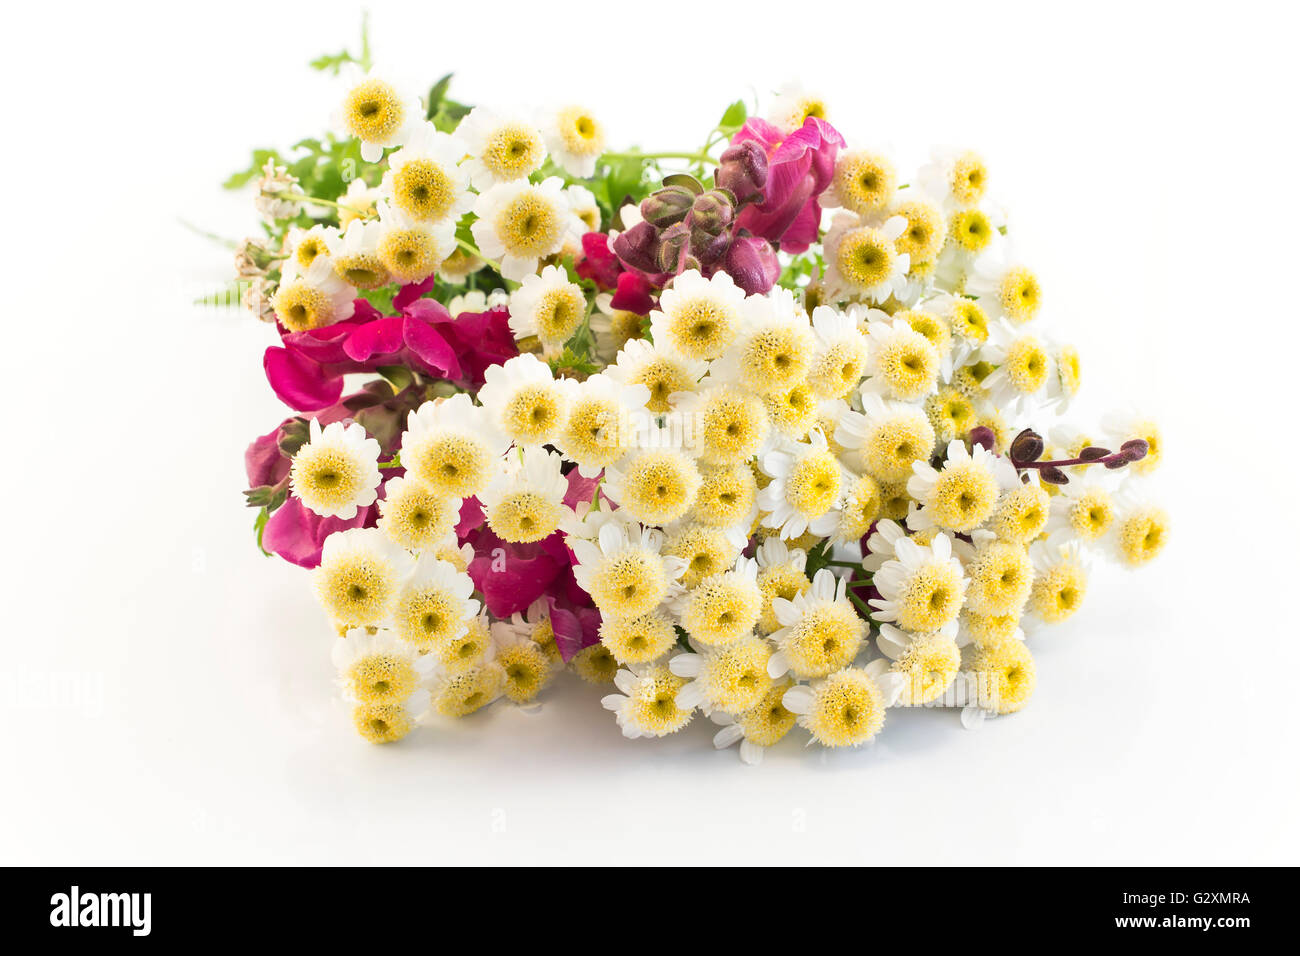 Small Daisies Isolated on White. Stock Photo